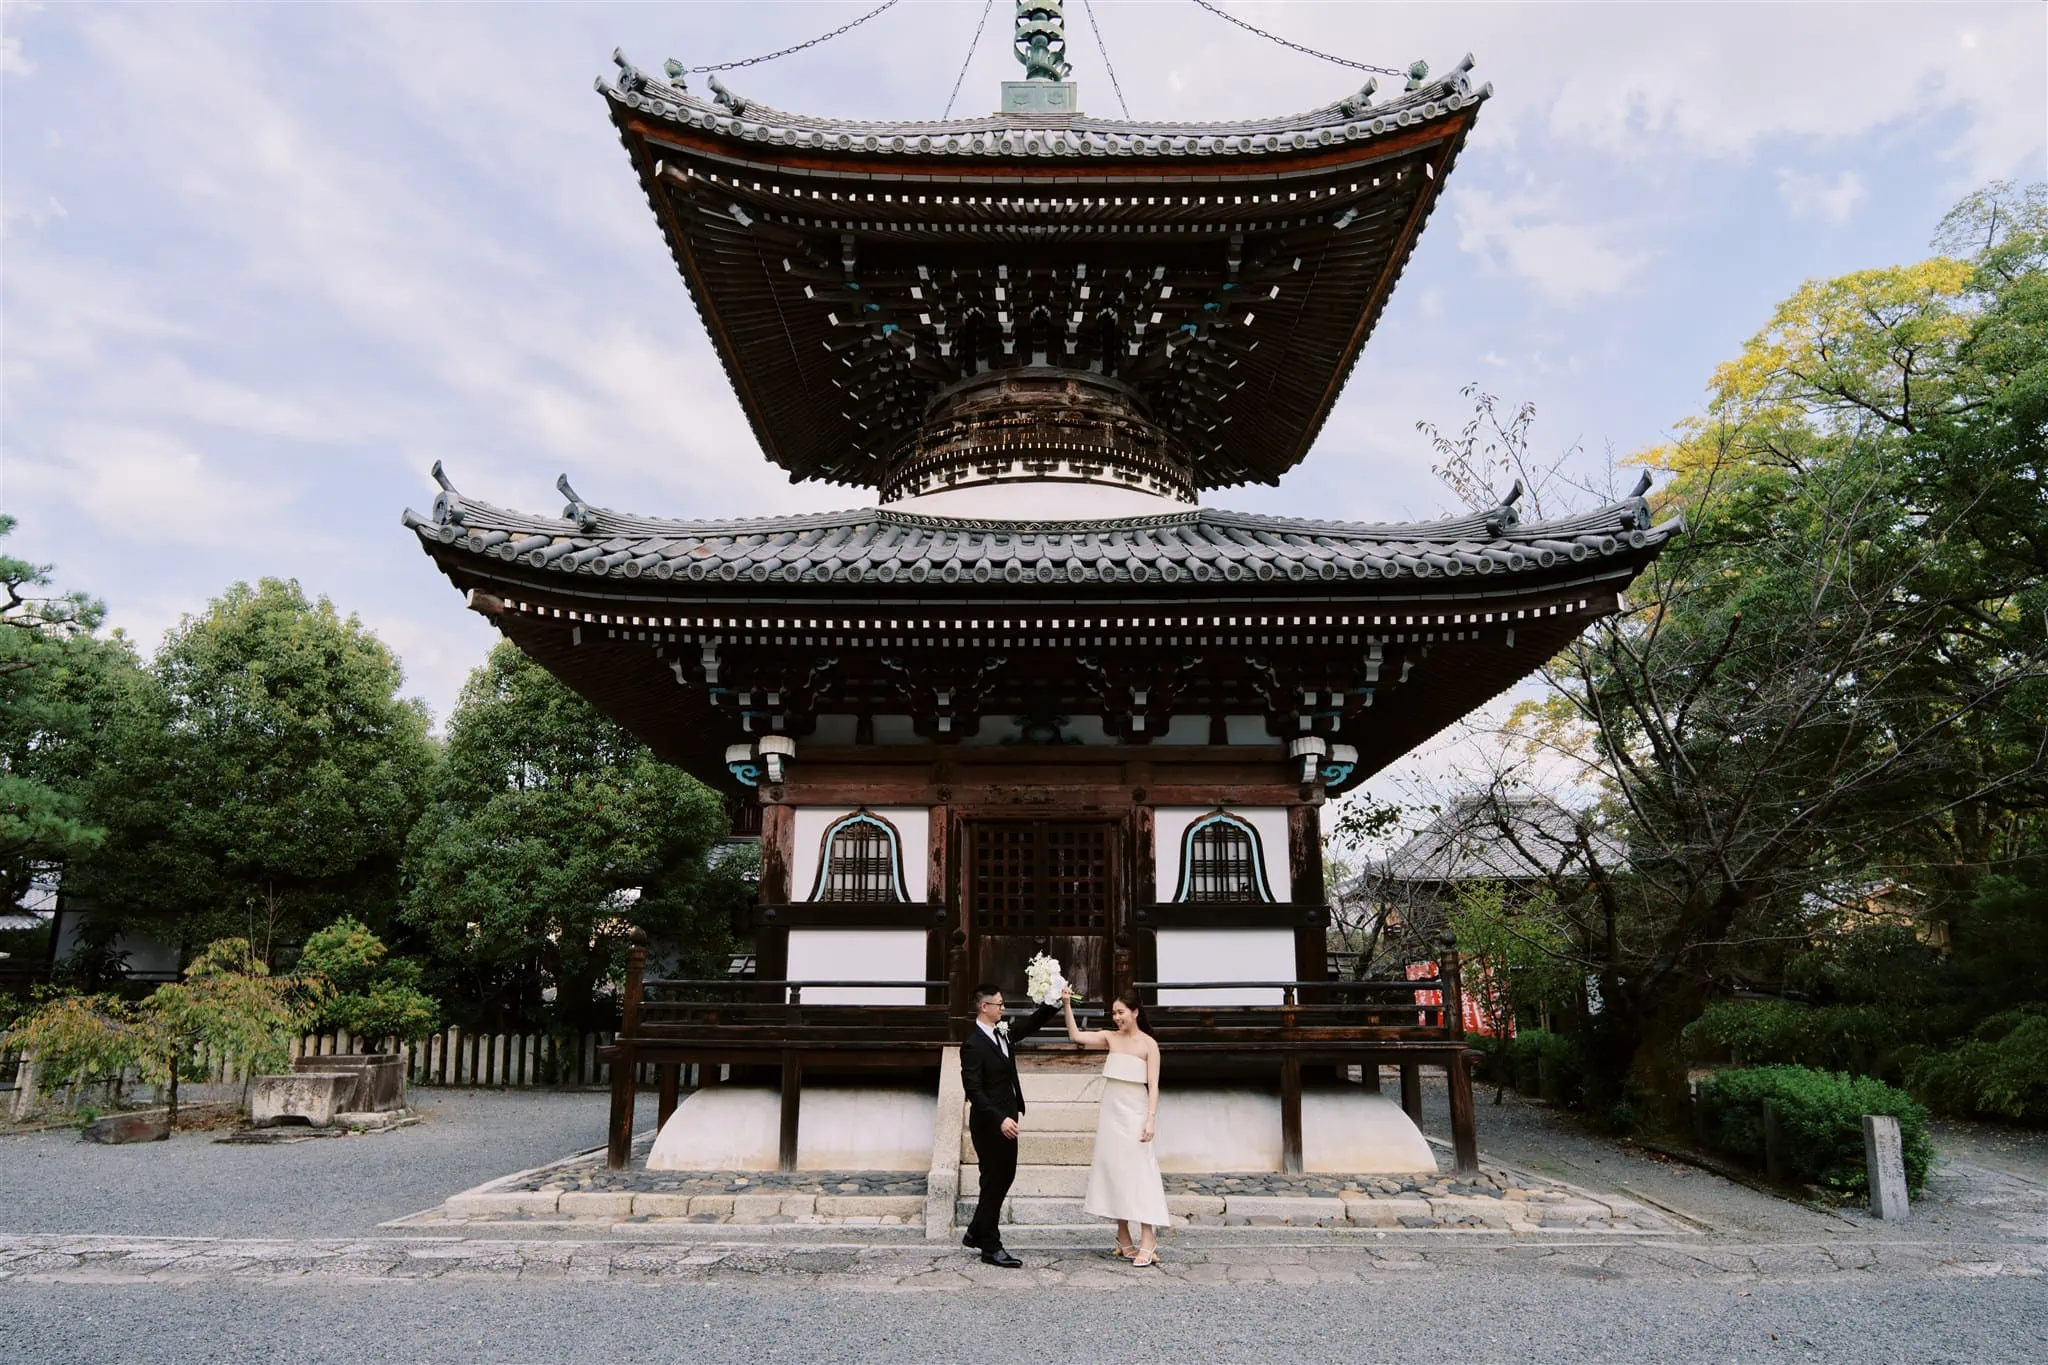 Kyoto Tokyo Japan Elopement Wedding Photographer, Planner & Videographer | A Japan elopement, with a bride and groom standing in front of a pagoda.